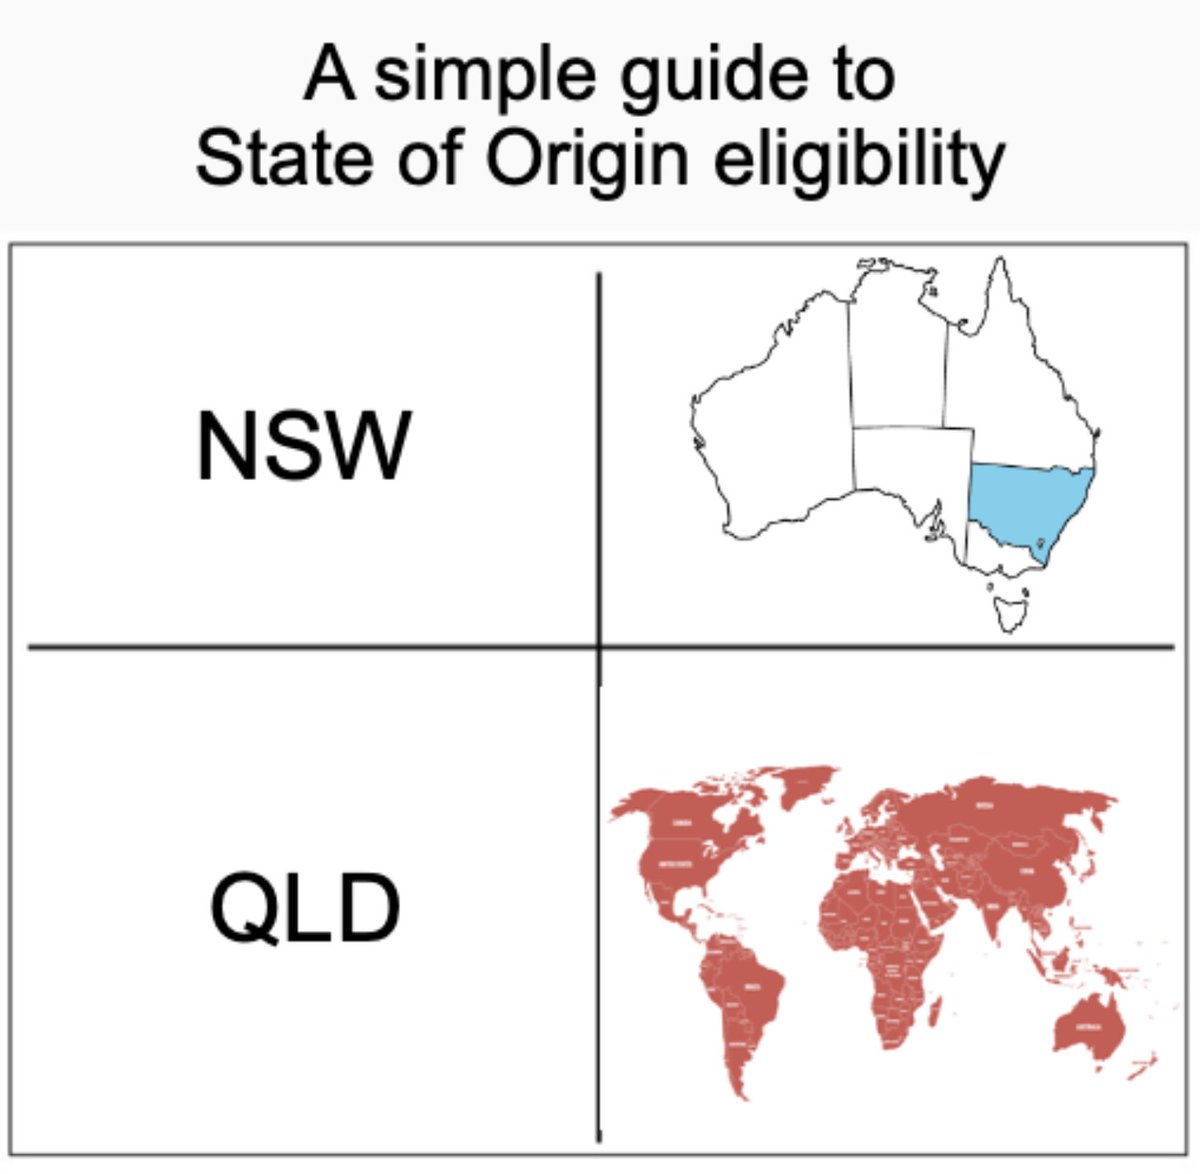 State of Origin gets underway tomorrow night. Here’s a quick reminder of who's permitted to play for each team:

#QueenslandsEverywhere #StateOfOrigin